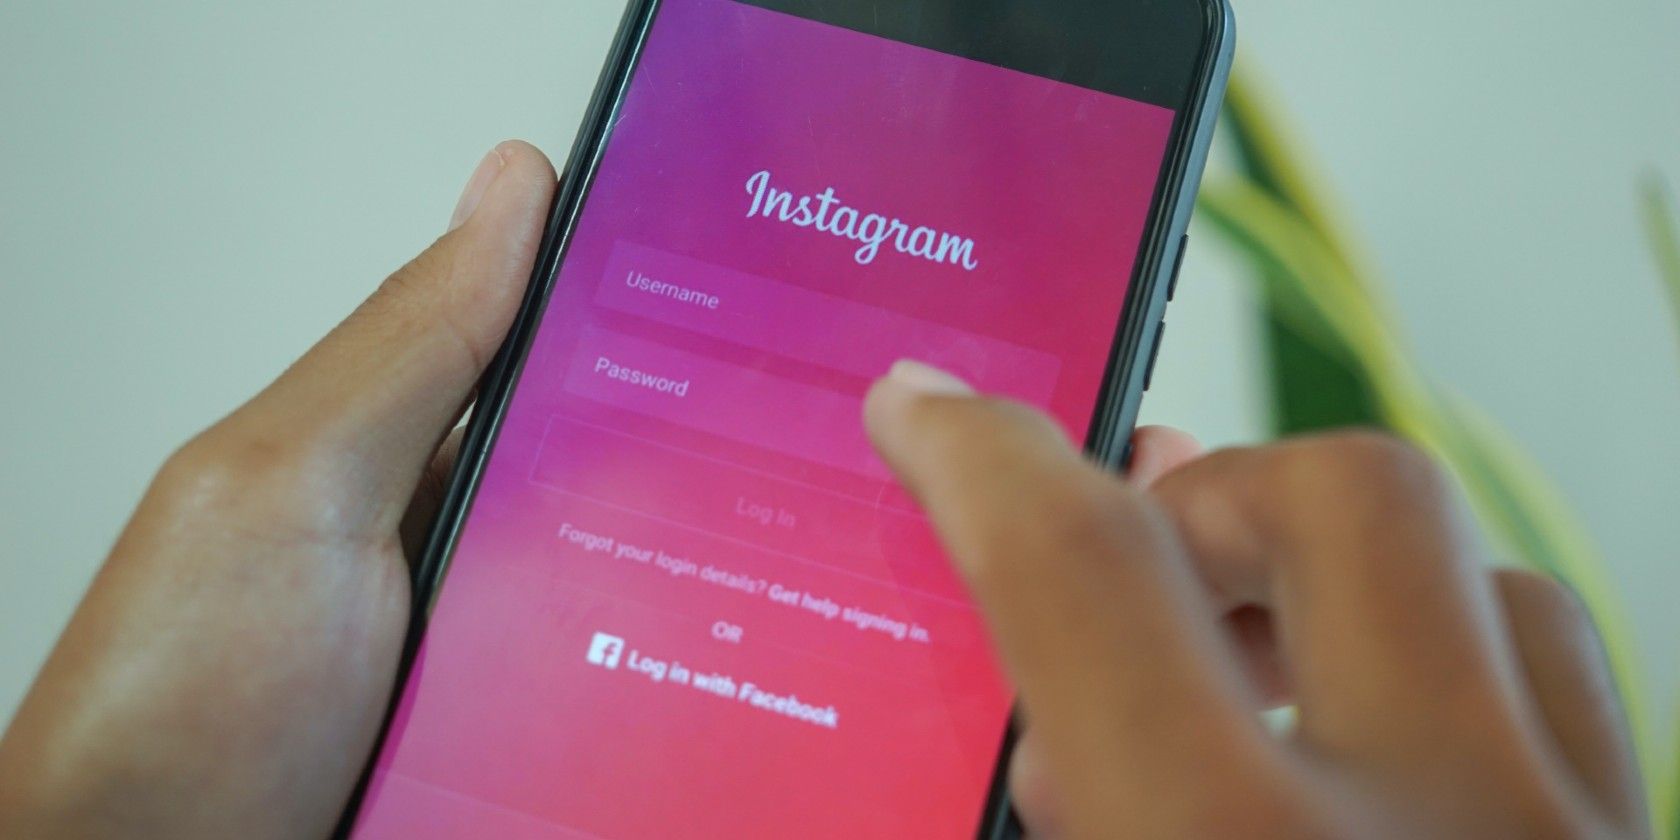 Person holding a phone showing the Instagram app login screen.